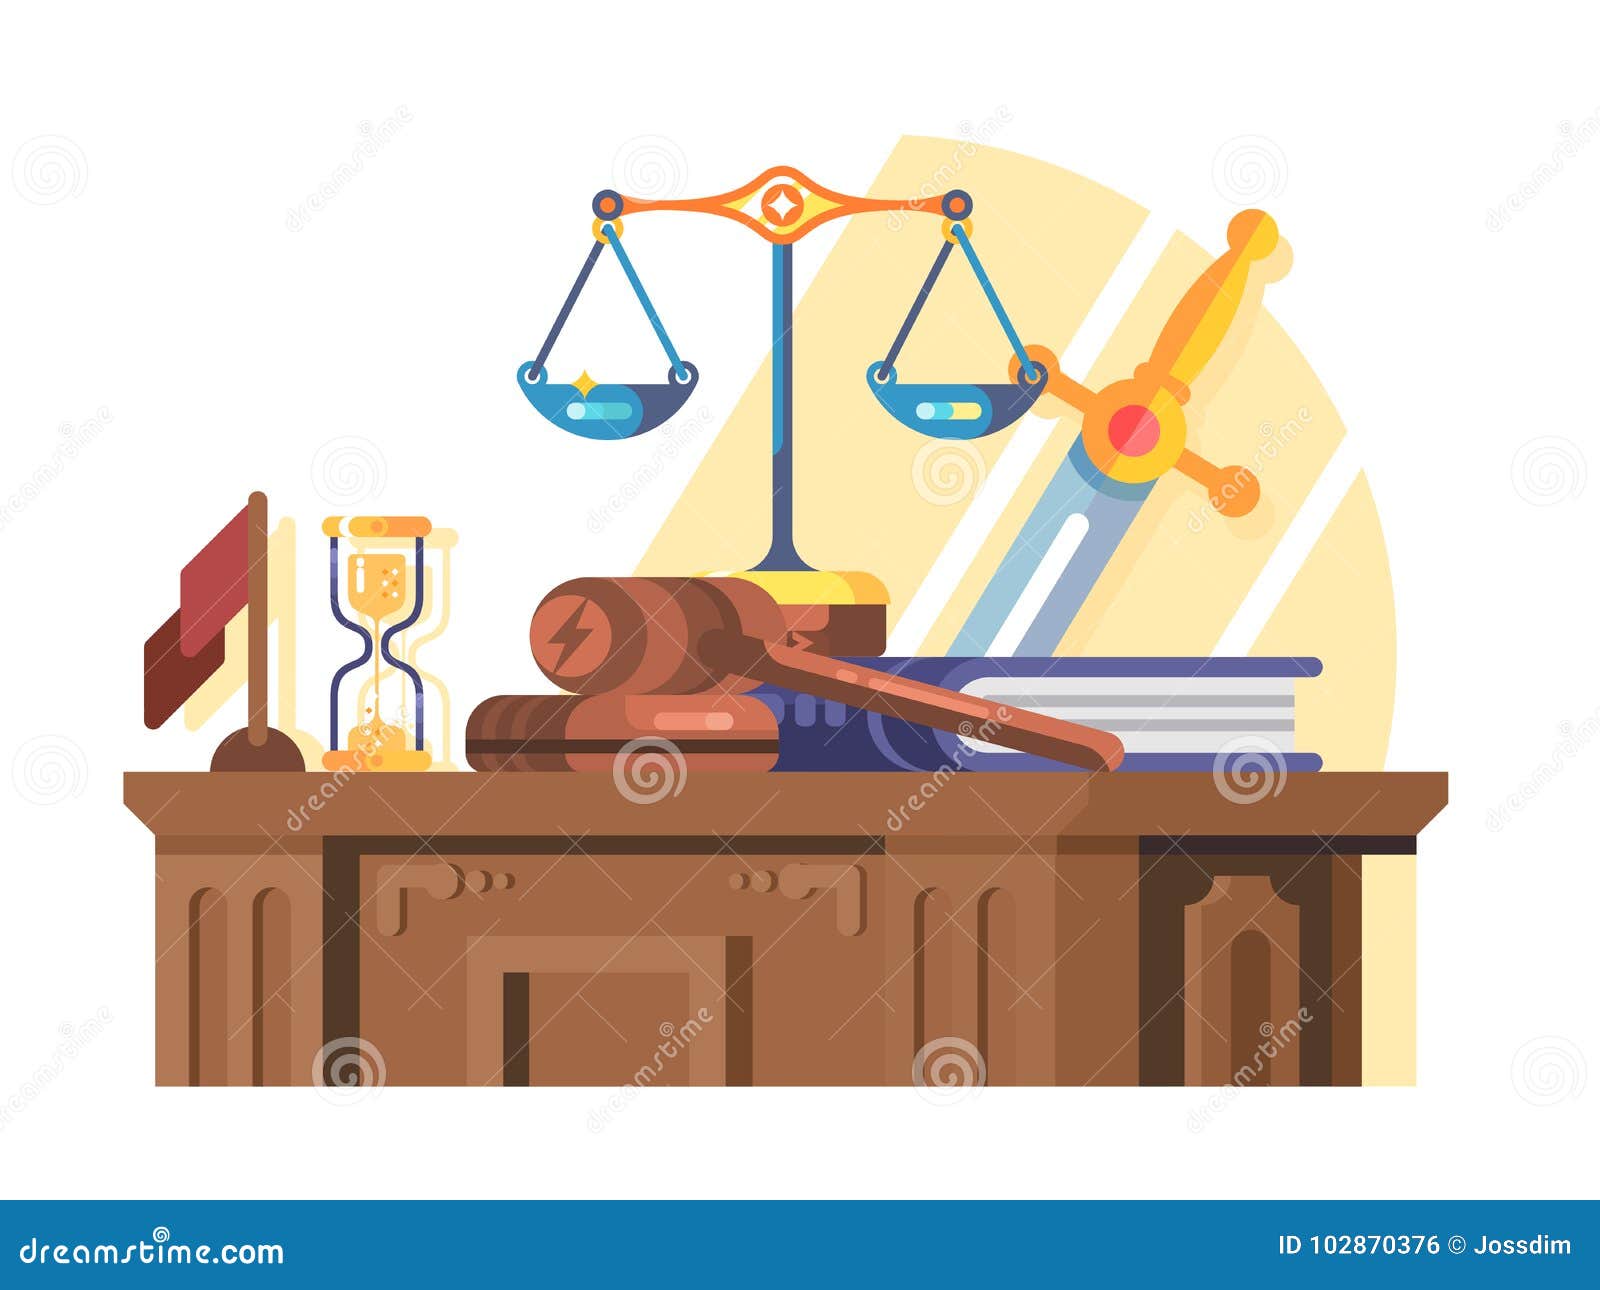 jurisprudence court and law concept flat